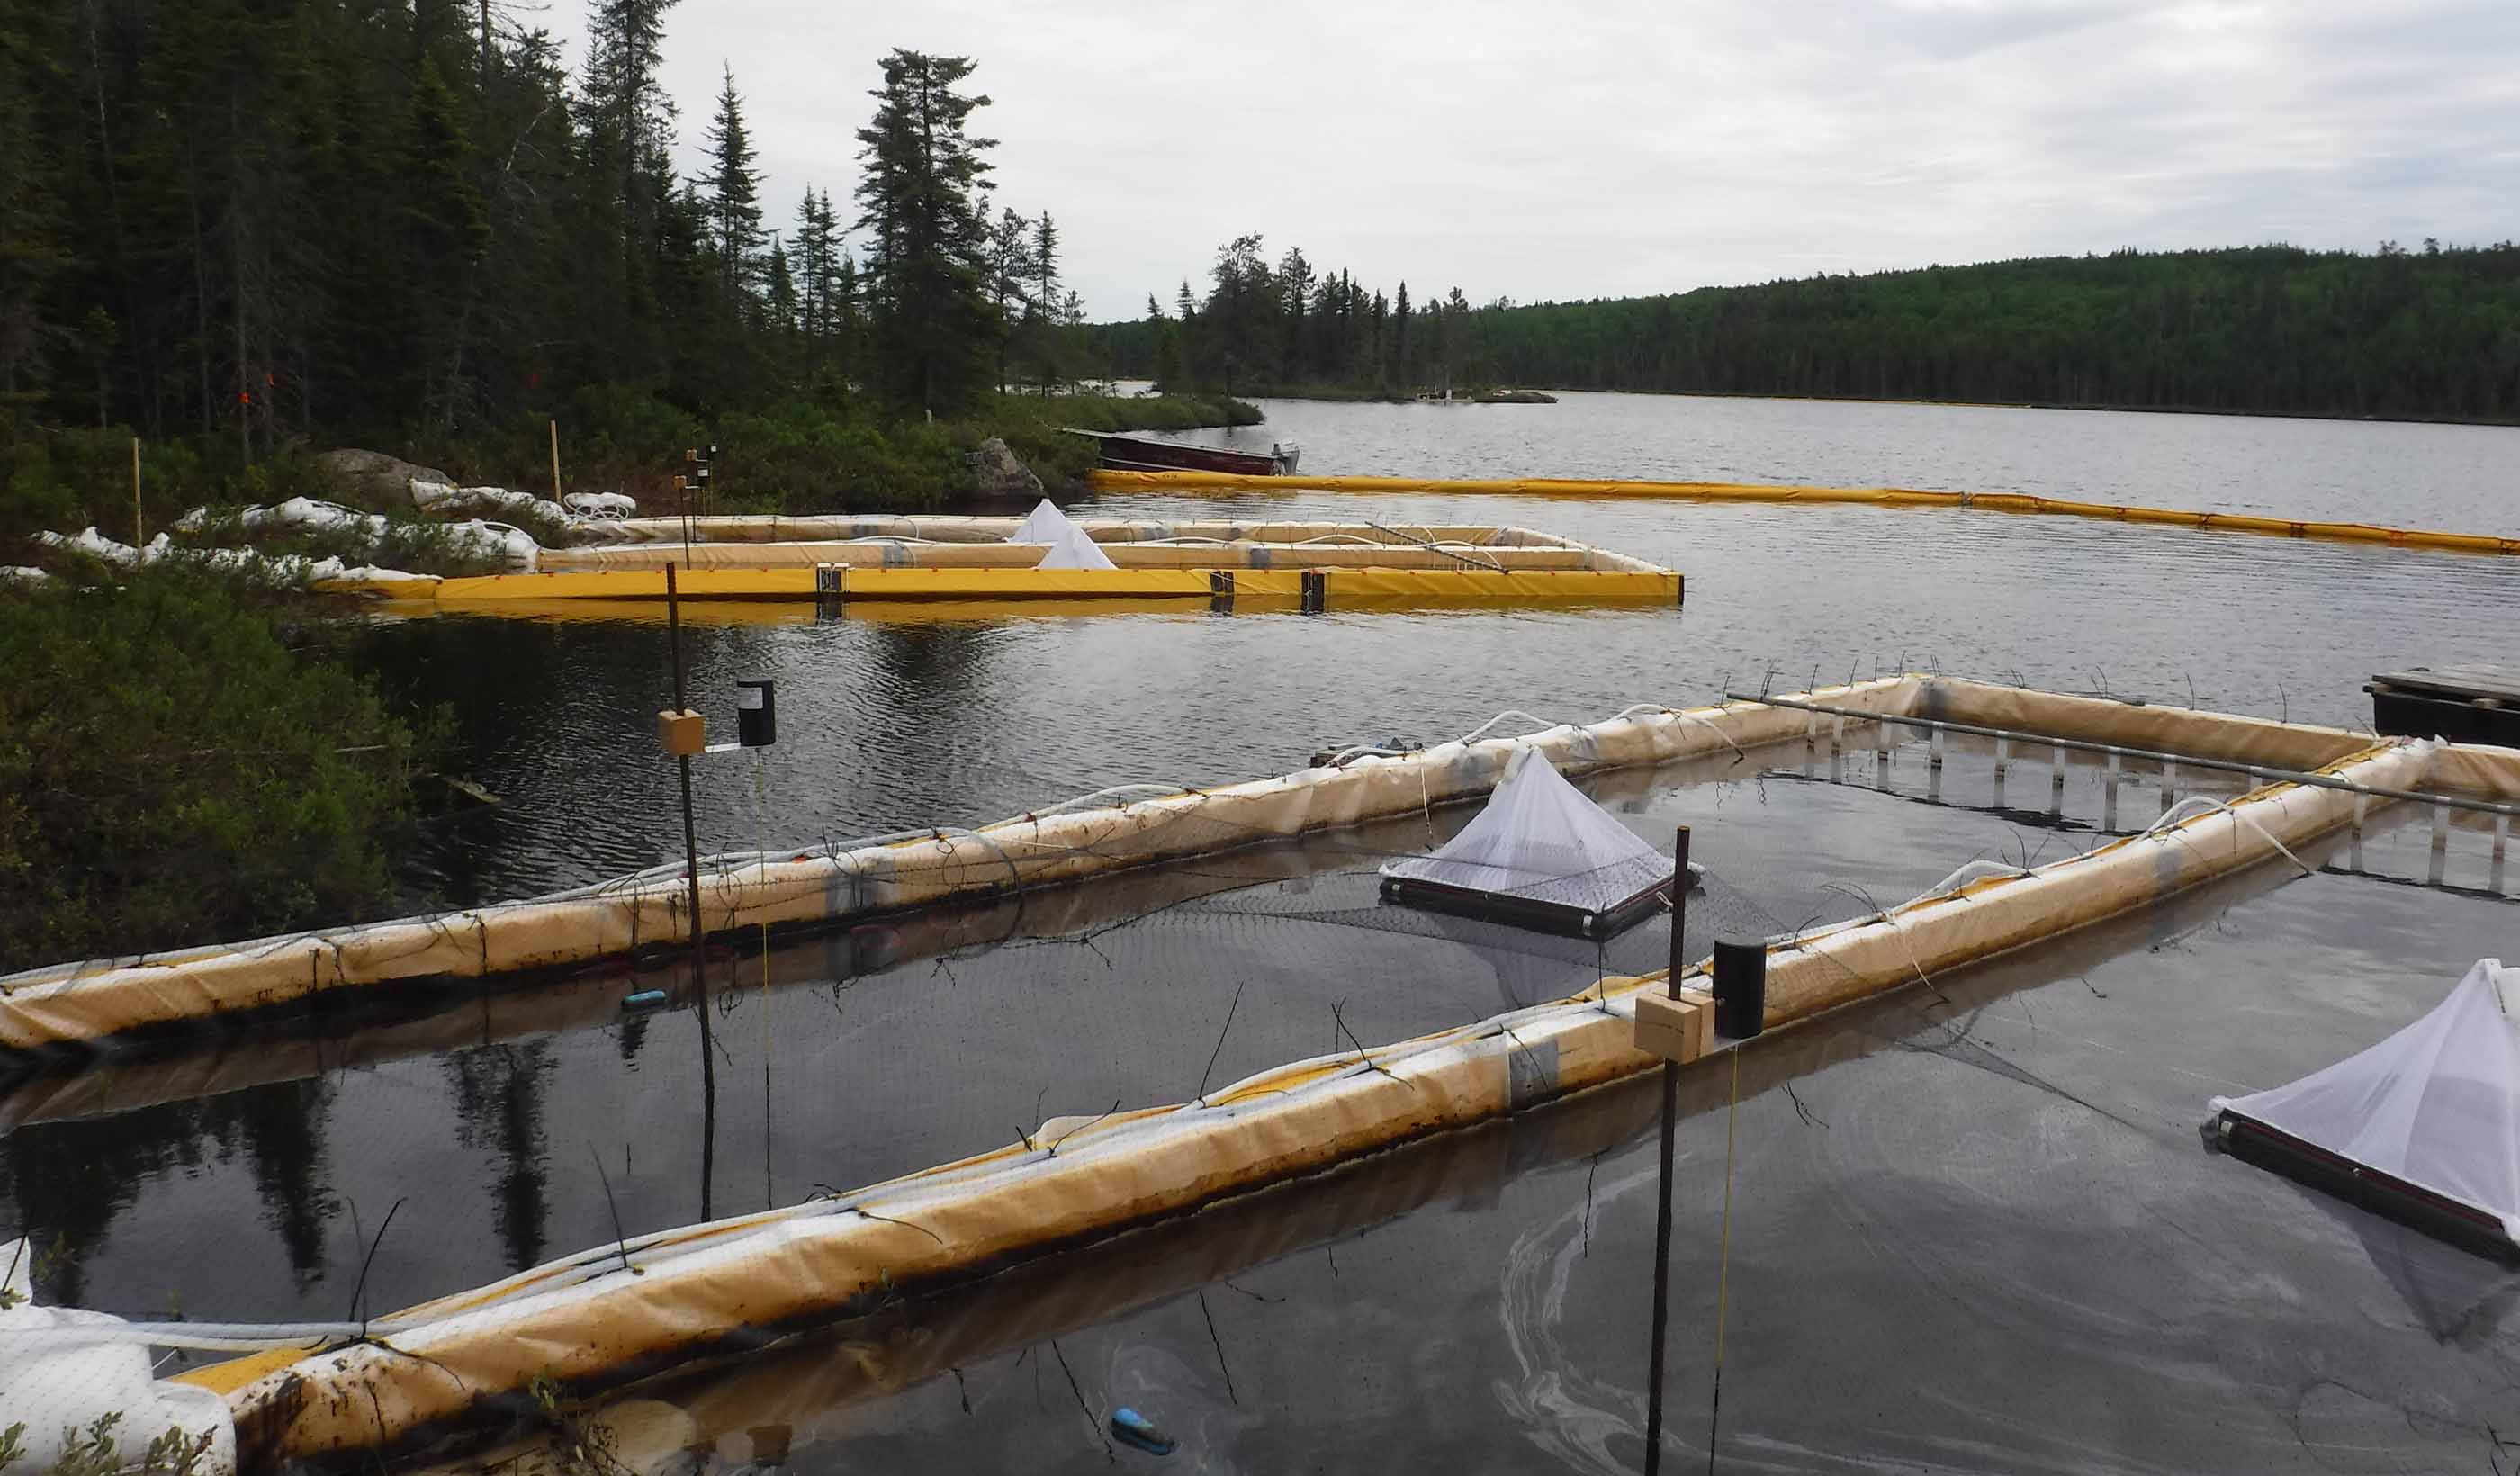 Assessing the use of a SWA for treating oil spills in Canada’s freshwater environments